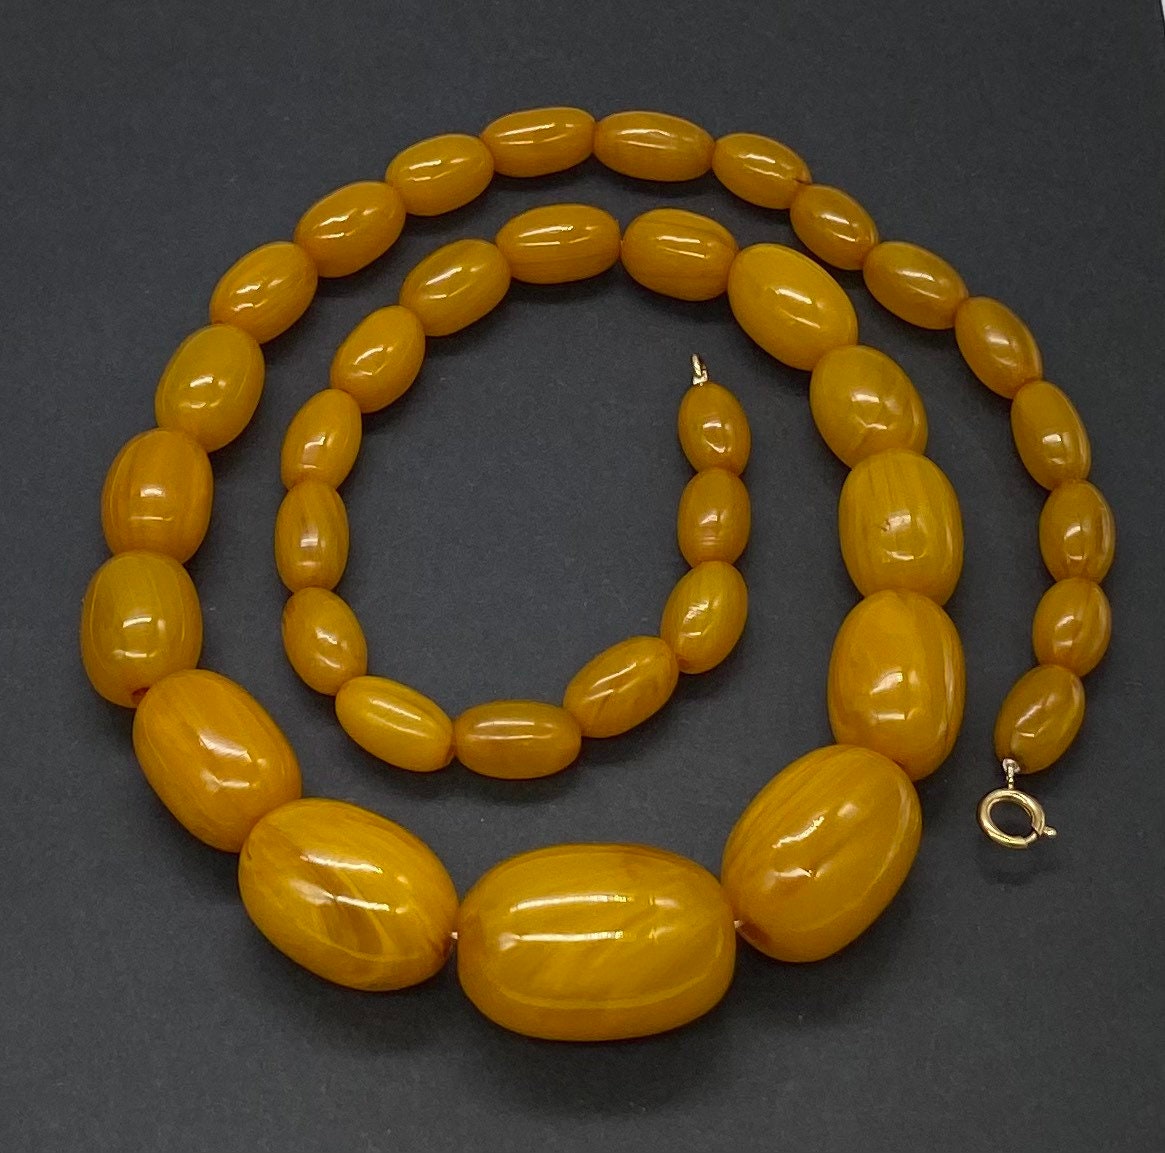 Genuine Amber Necklace Butterscotch Amber Necklace Pressed Amber | eBay